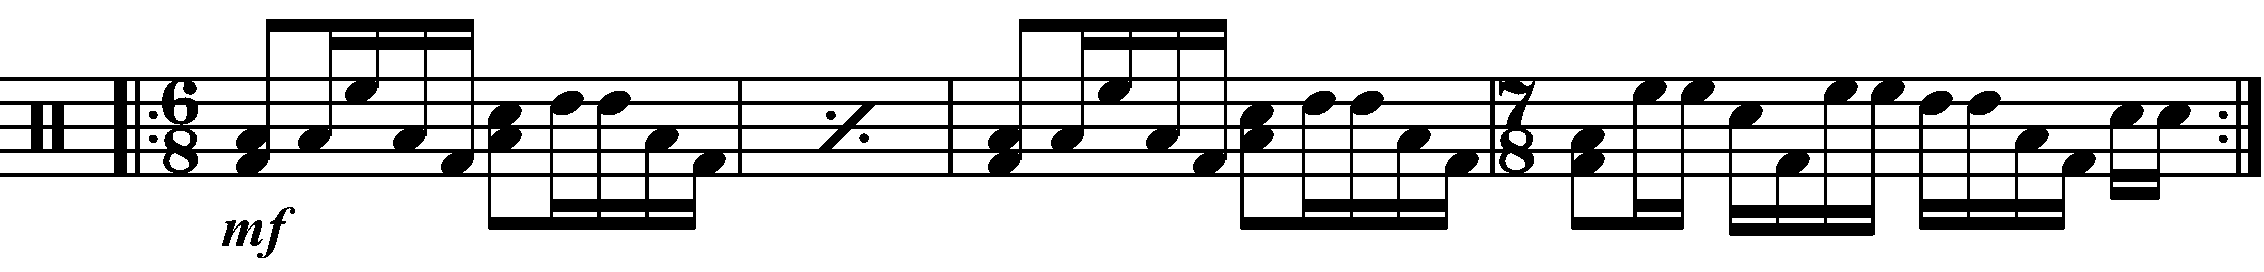 A four bar phrase using 6/8 and simple time 7/8.